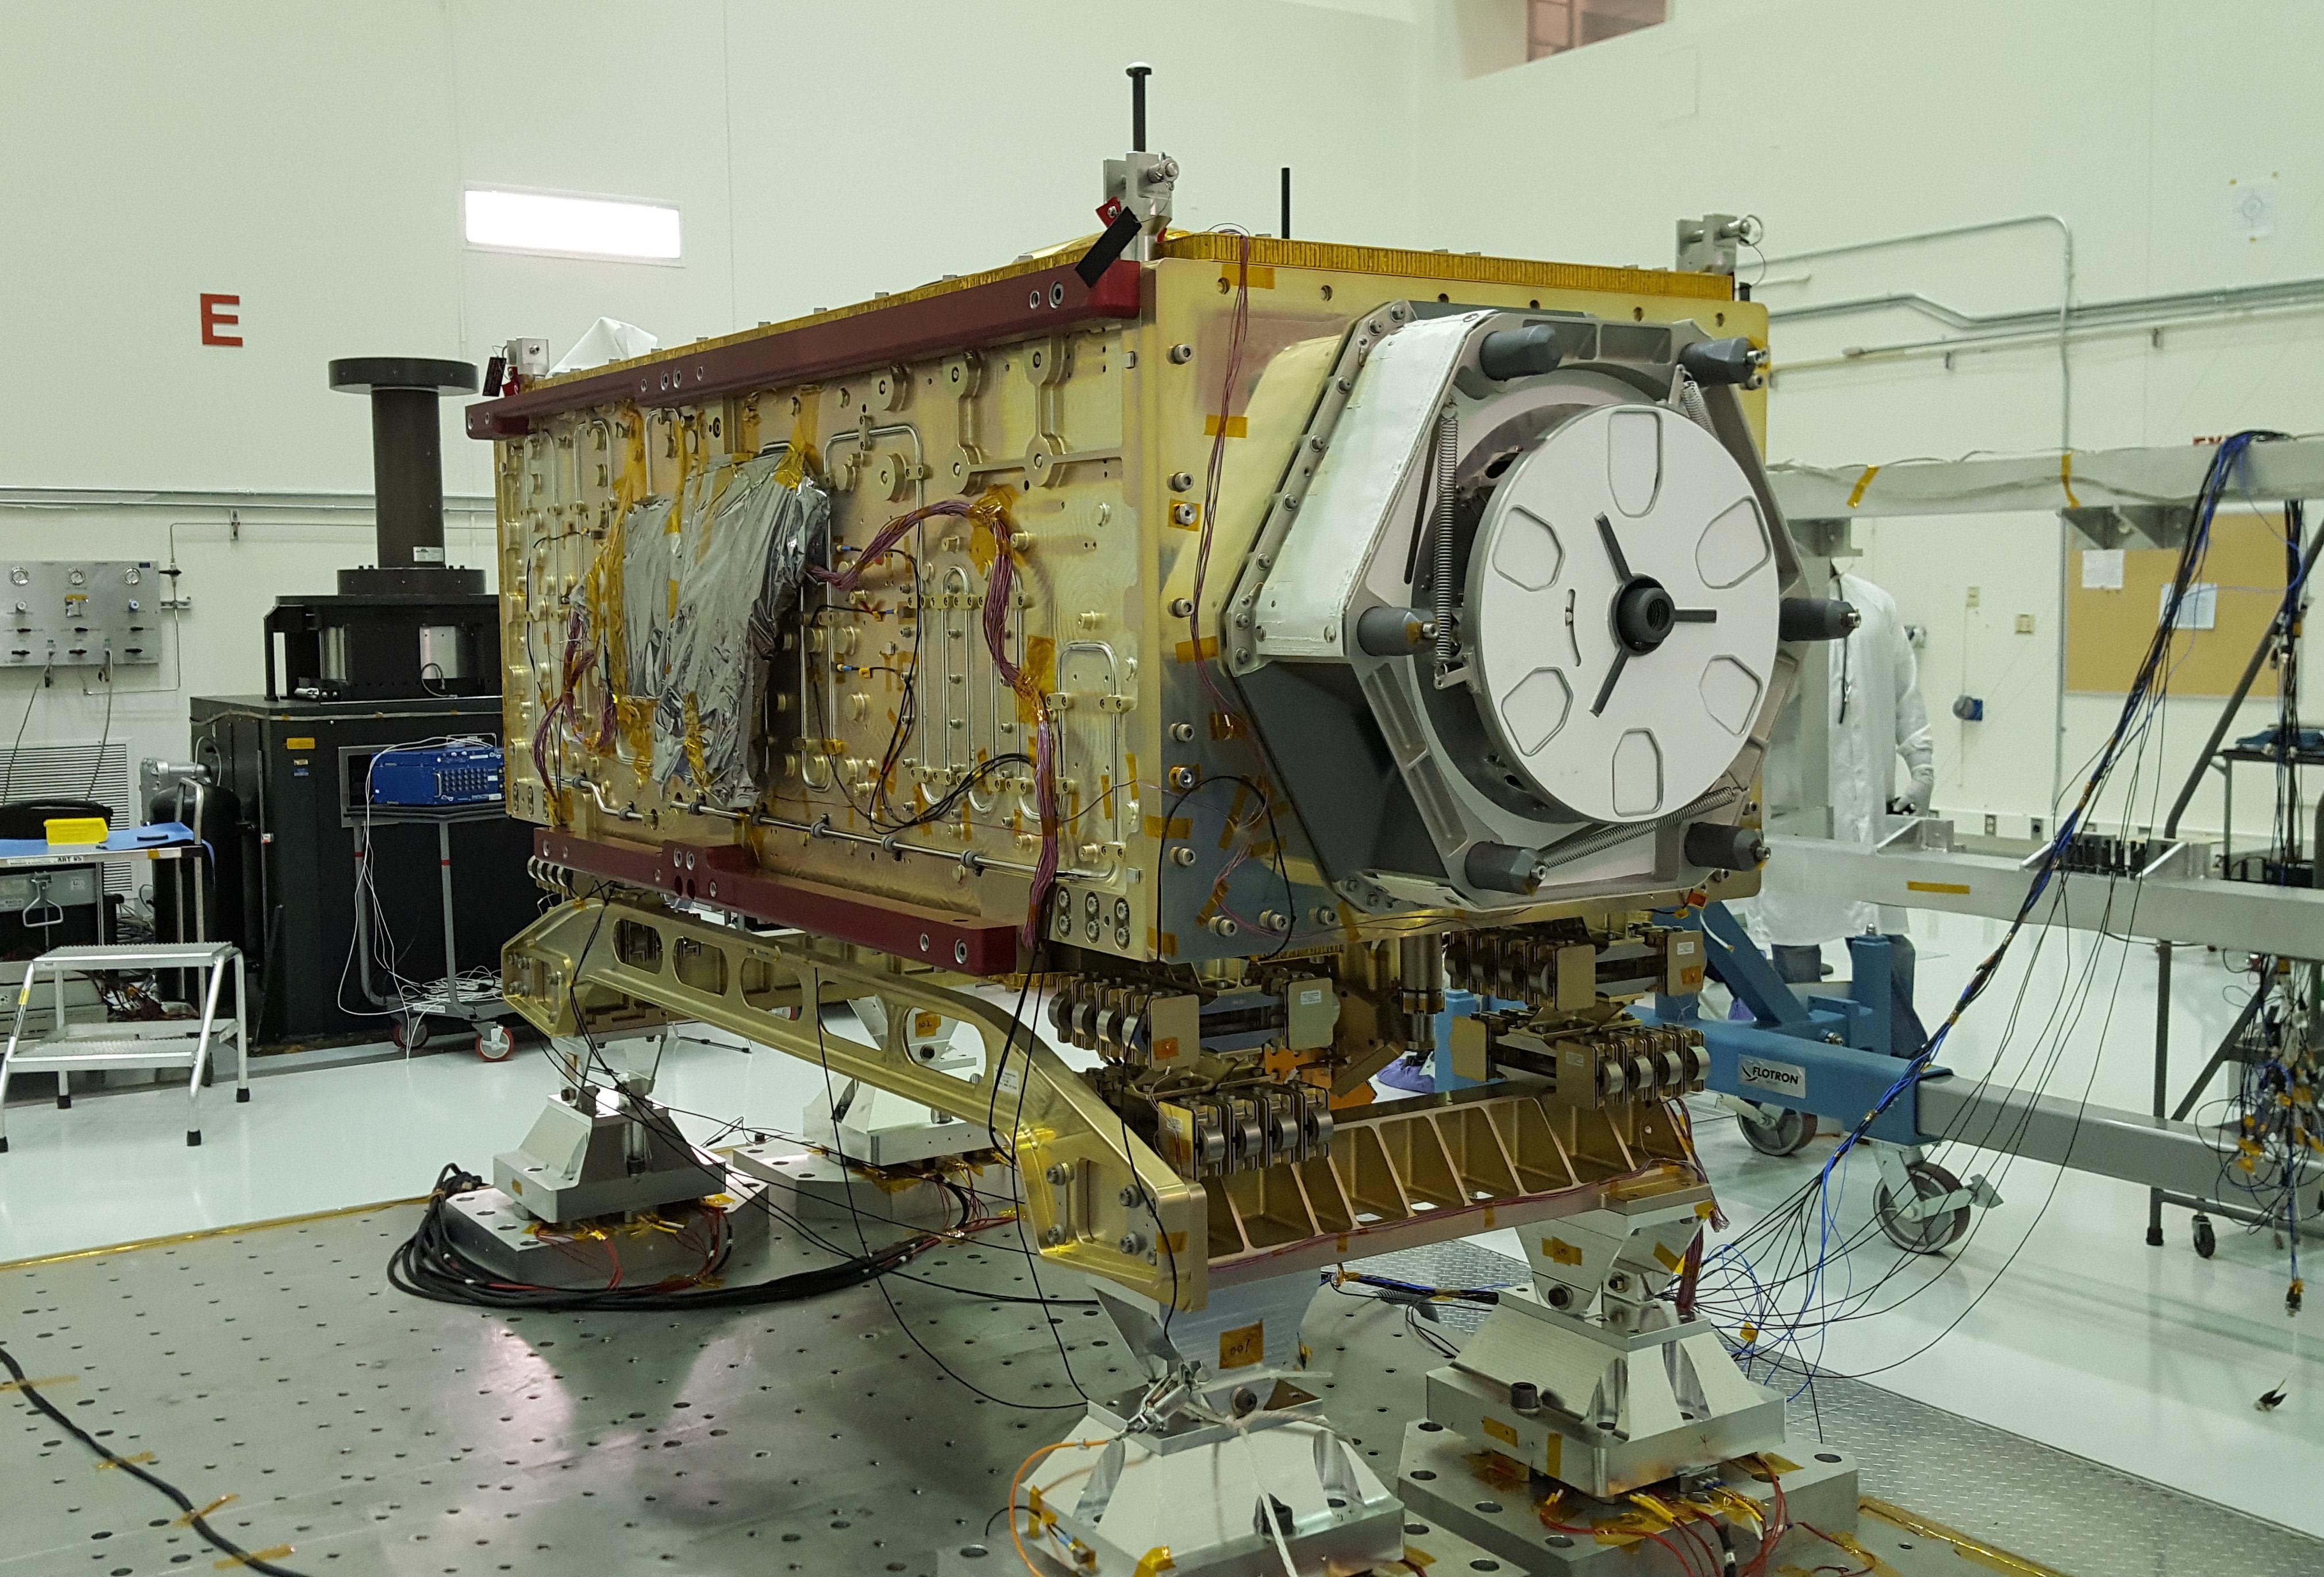 NASA's OCO-3 instrument sits on the large vibration table (known as the "shaker") in the Environmental Test Lab at NASA's Jet Propulsion Laboratory.